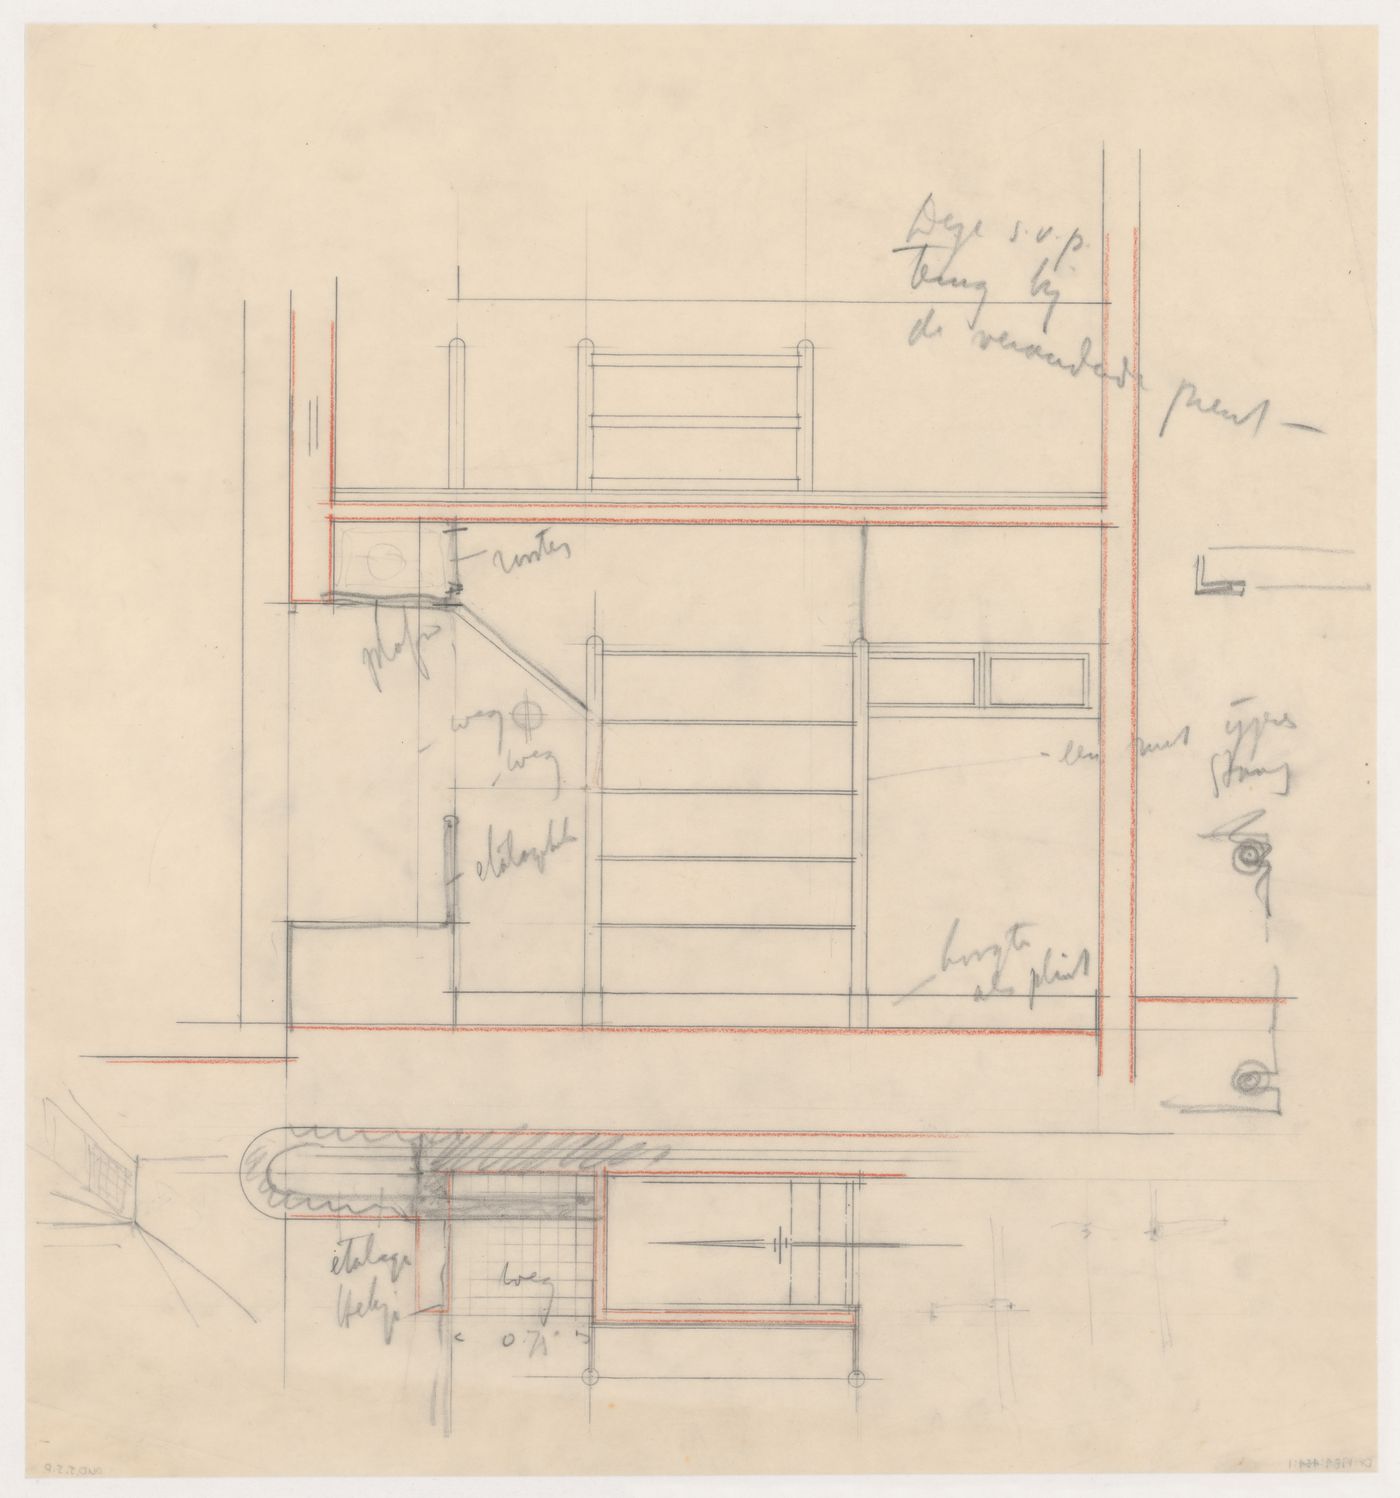 Section and plan for a shop for industrial row houses, Hoek van Holland, Netherlands